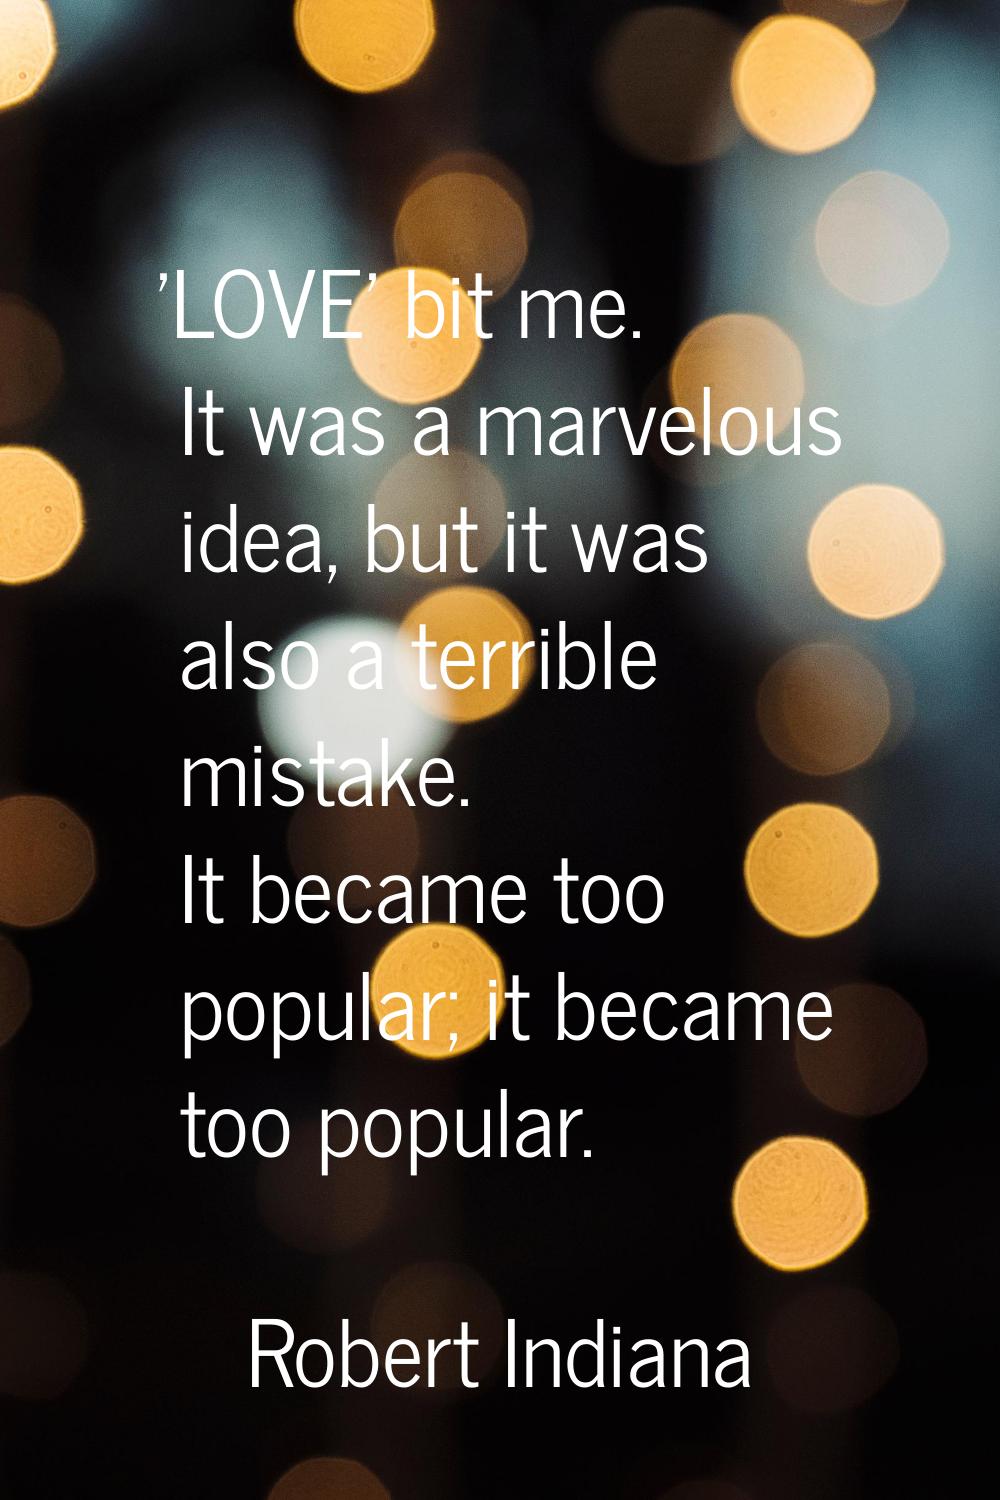 'LOVE' bit me. It was a marvelous idea, but it was also a terrible mistake. It became too popular; 